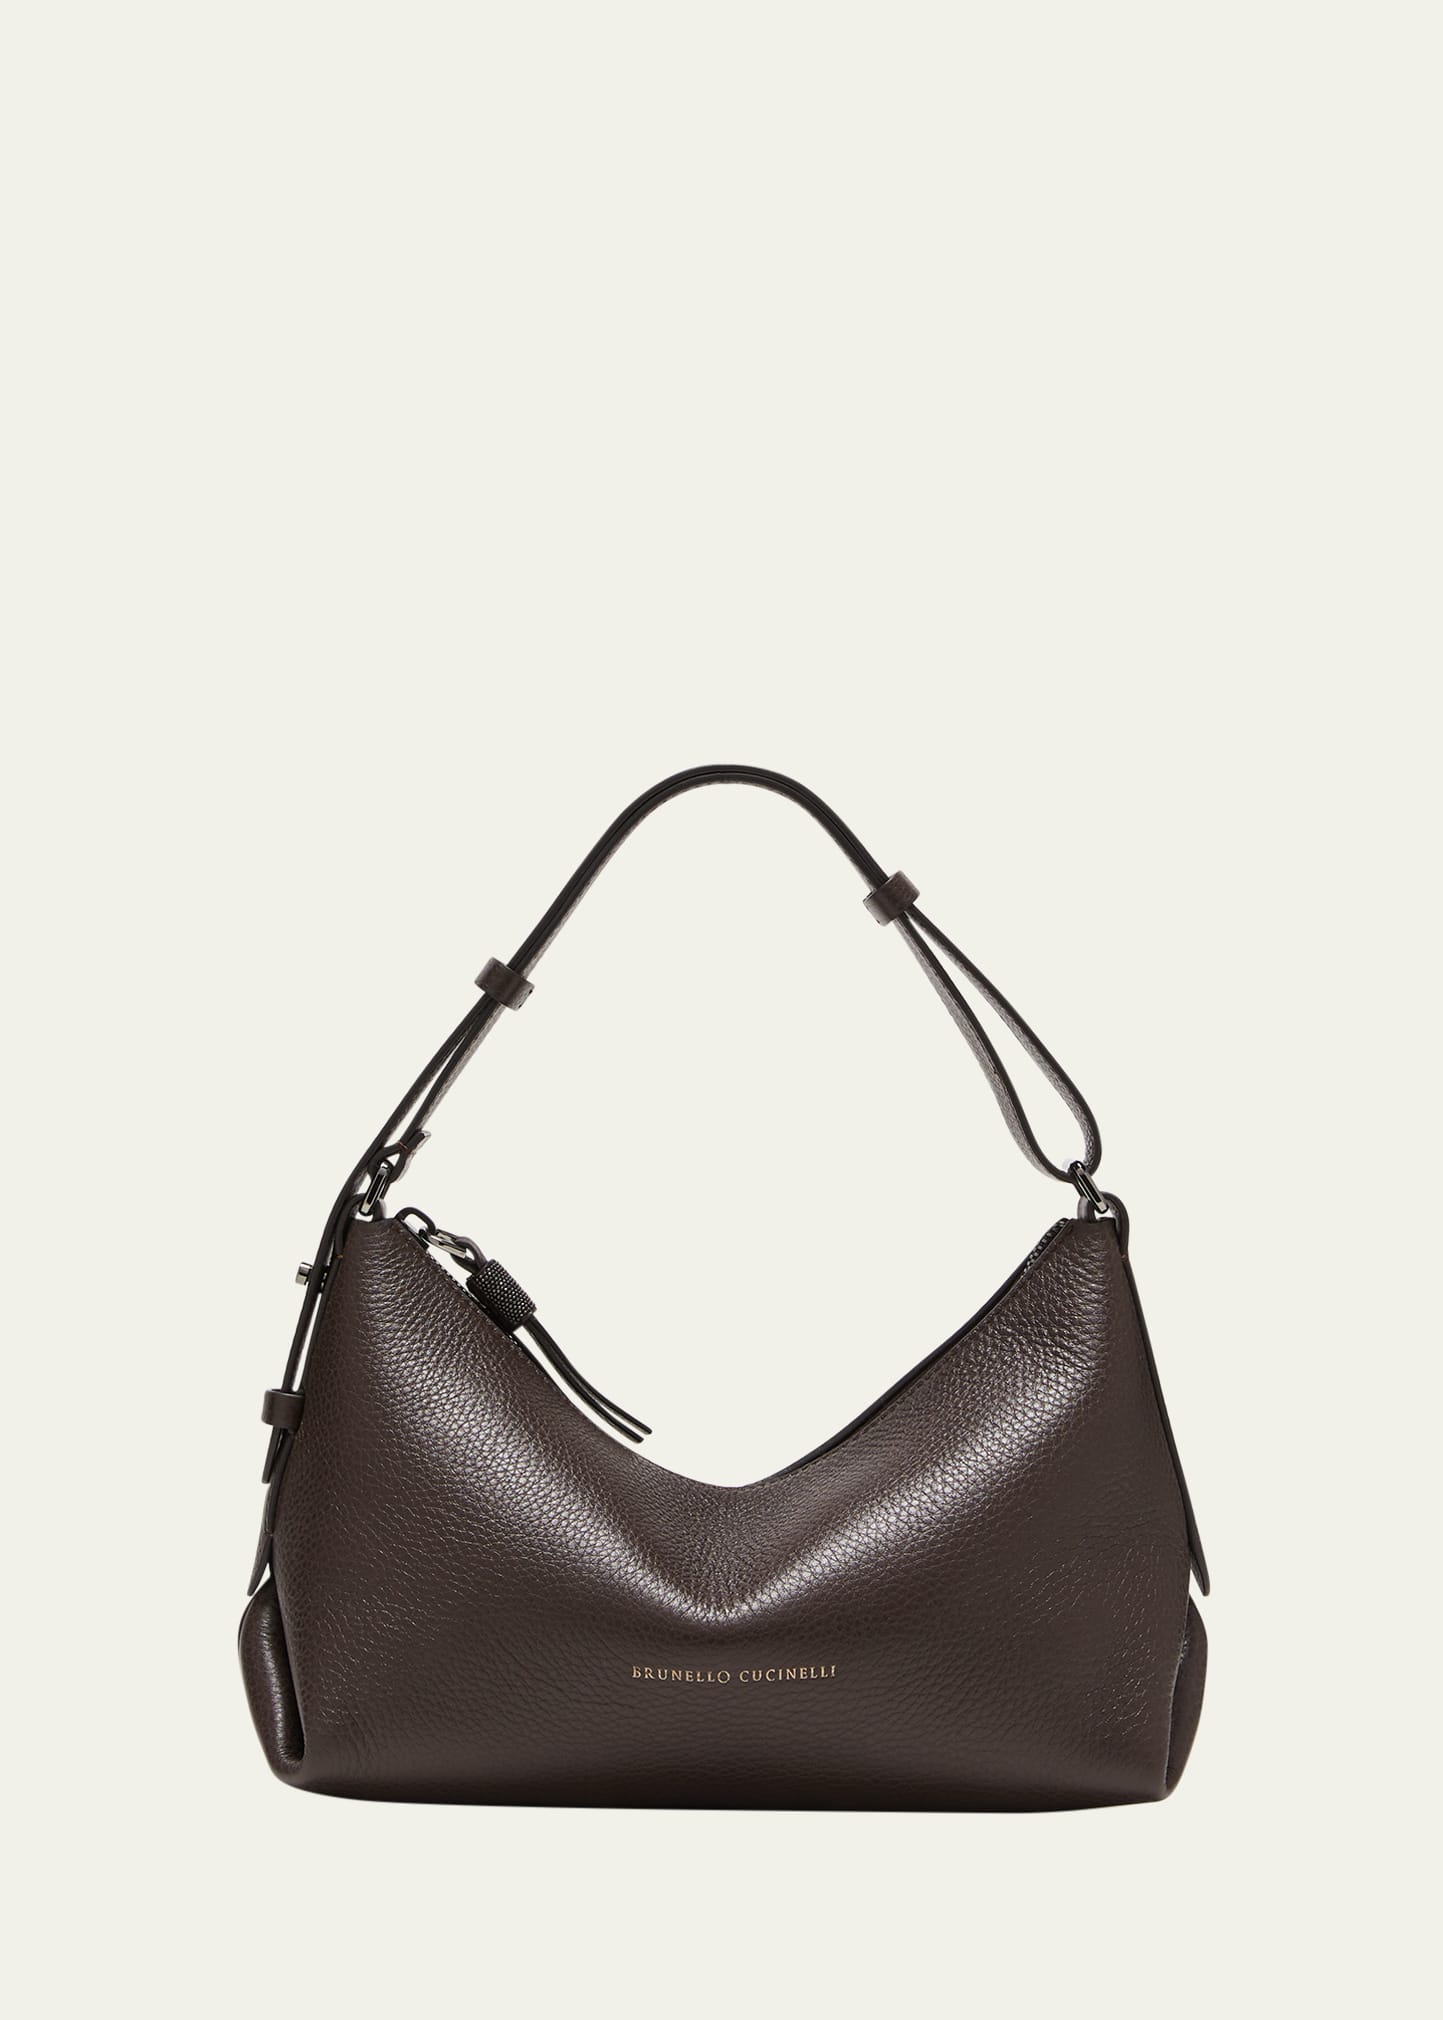 Brunello Cucinelli Small Zip Leather Shoulder Bag In Brown